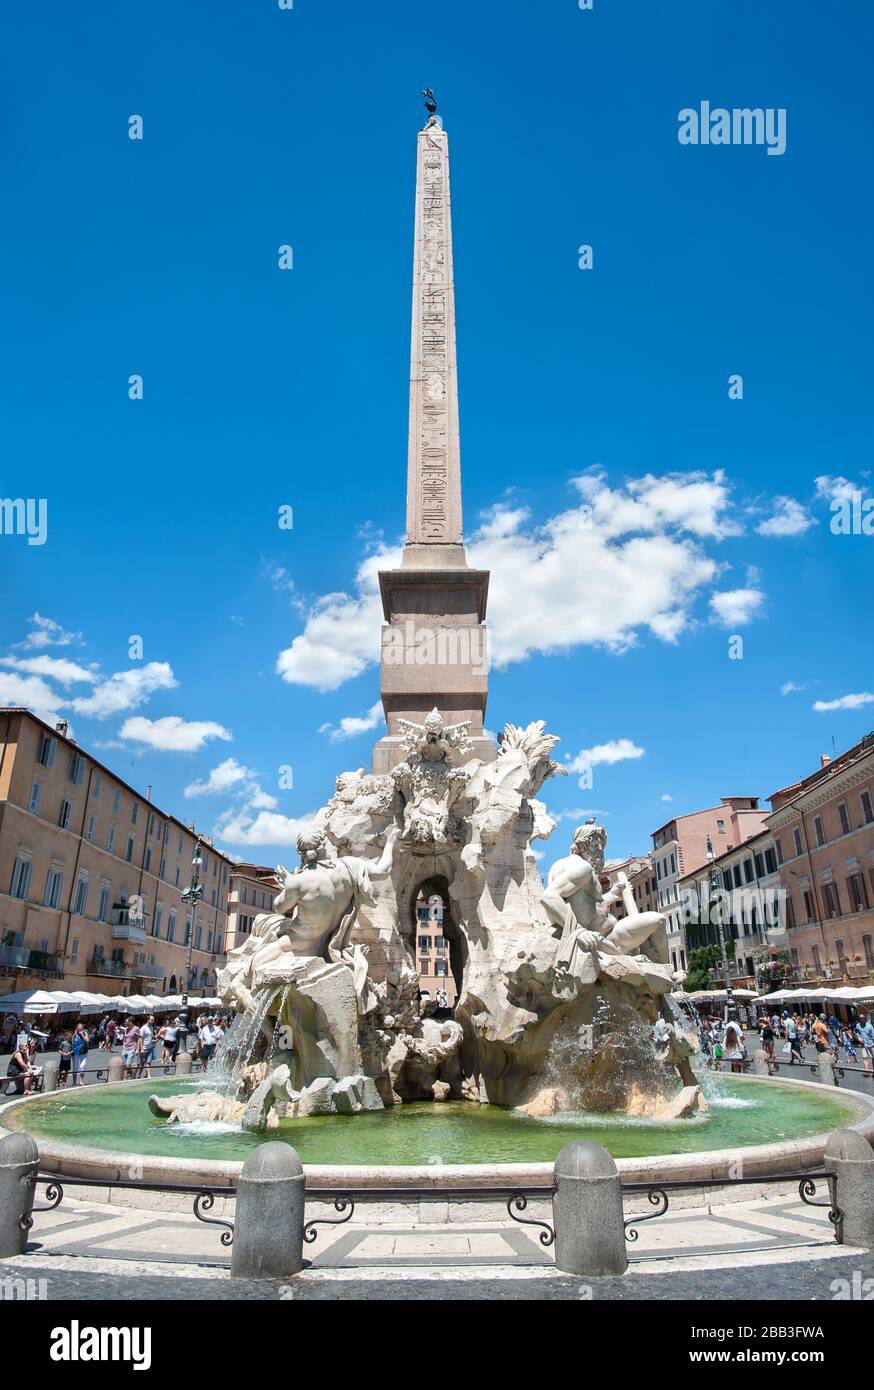 The Fountain of the Four Rivers (Fontana dei Quattro Fiumi) topped by the Obelisk of Domitian, in the Piazza Navona, Rome Stock Photo